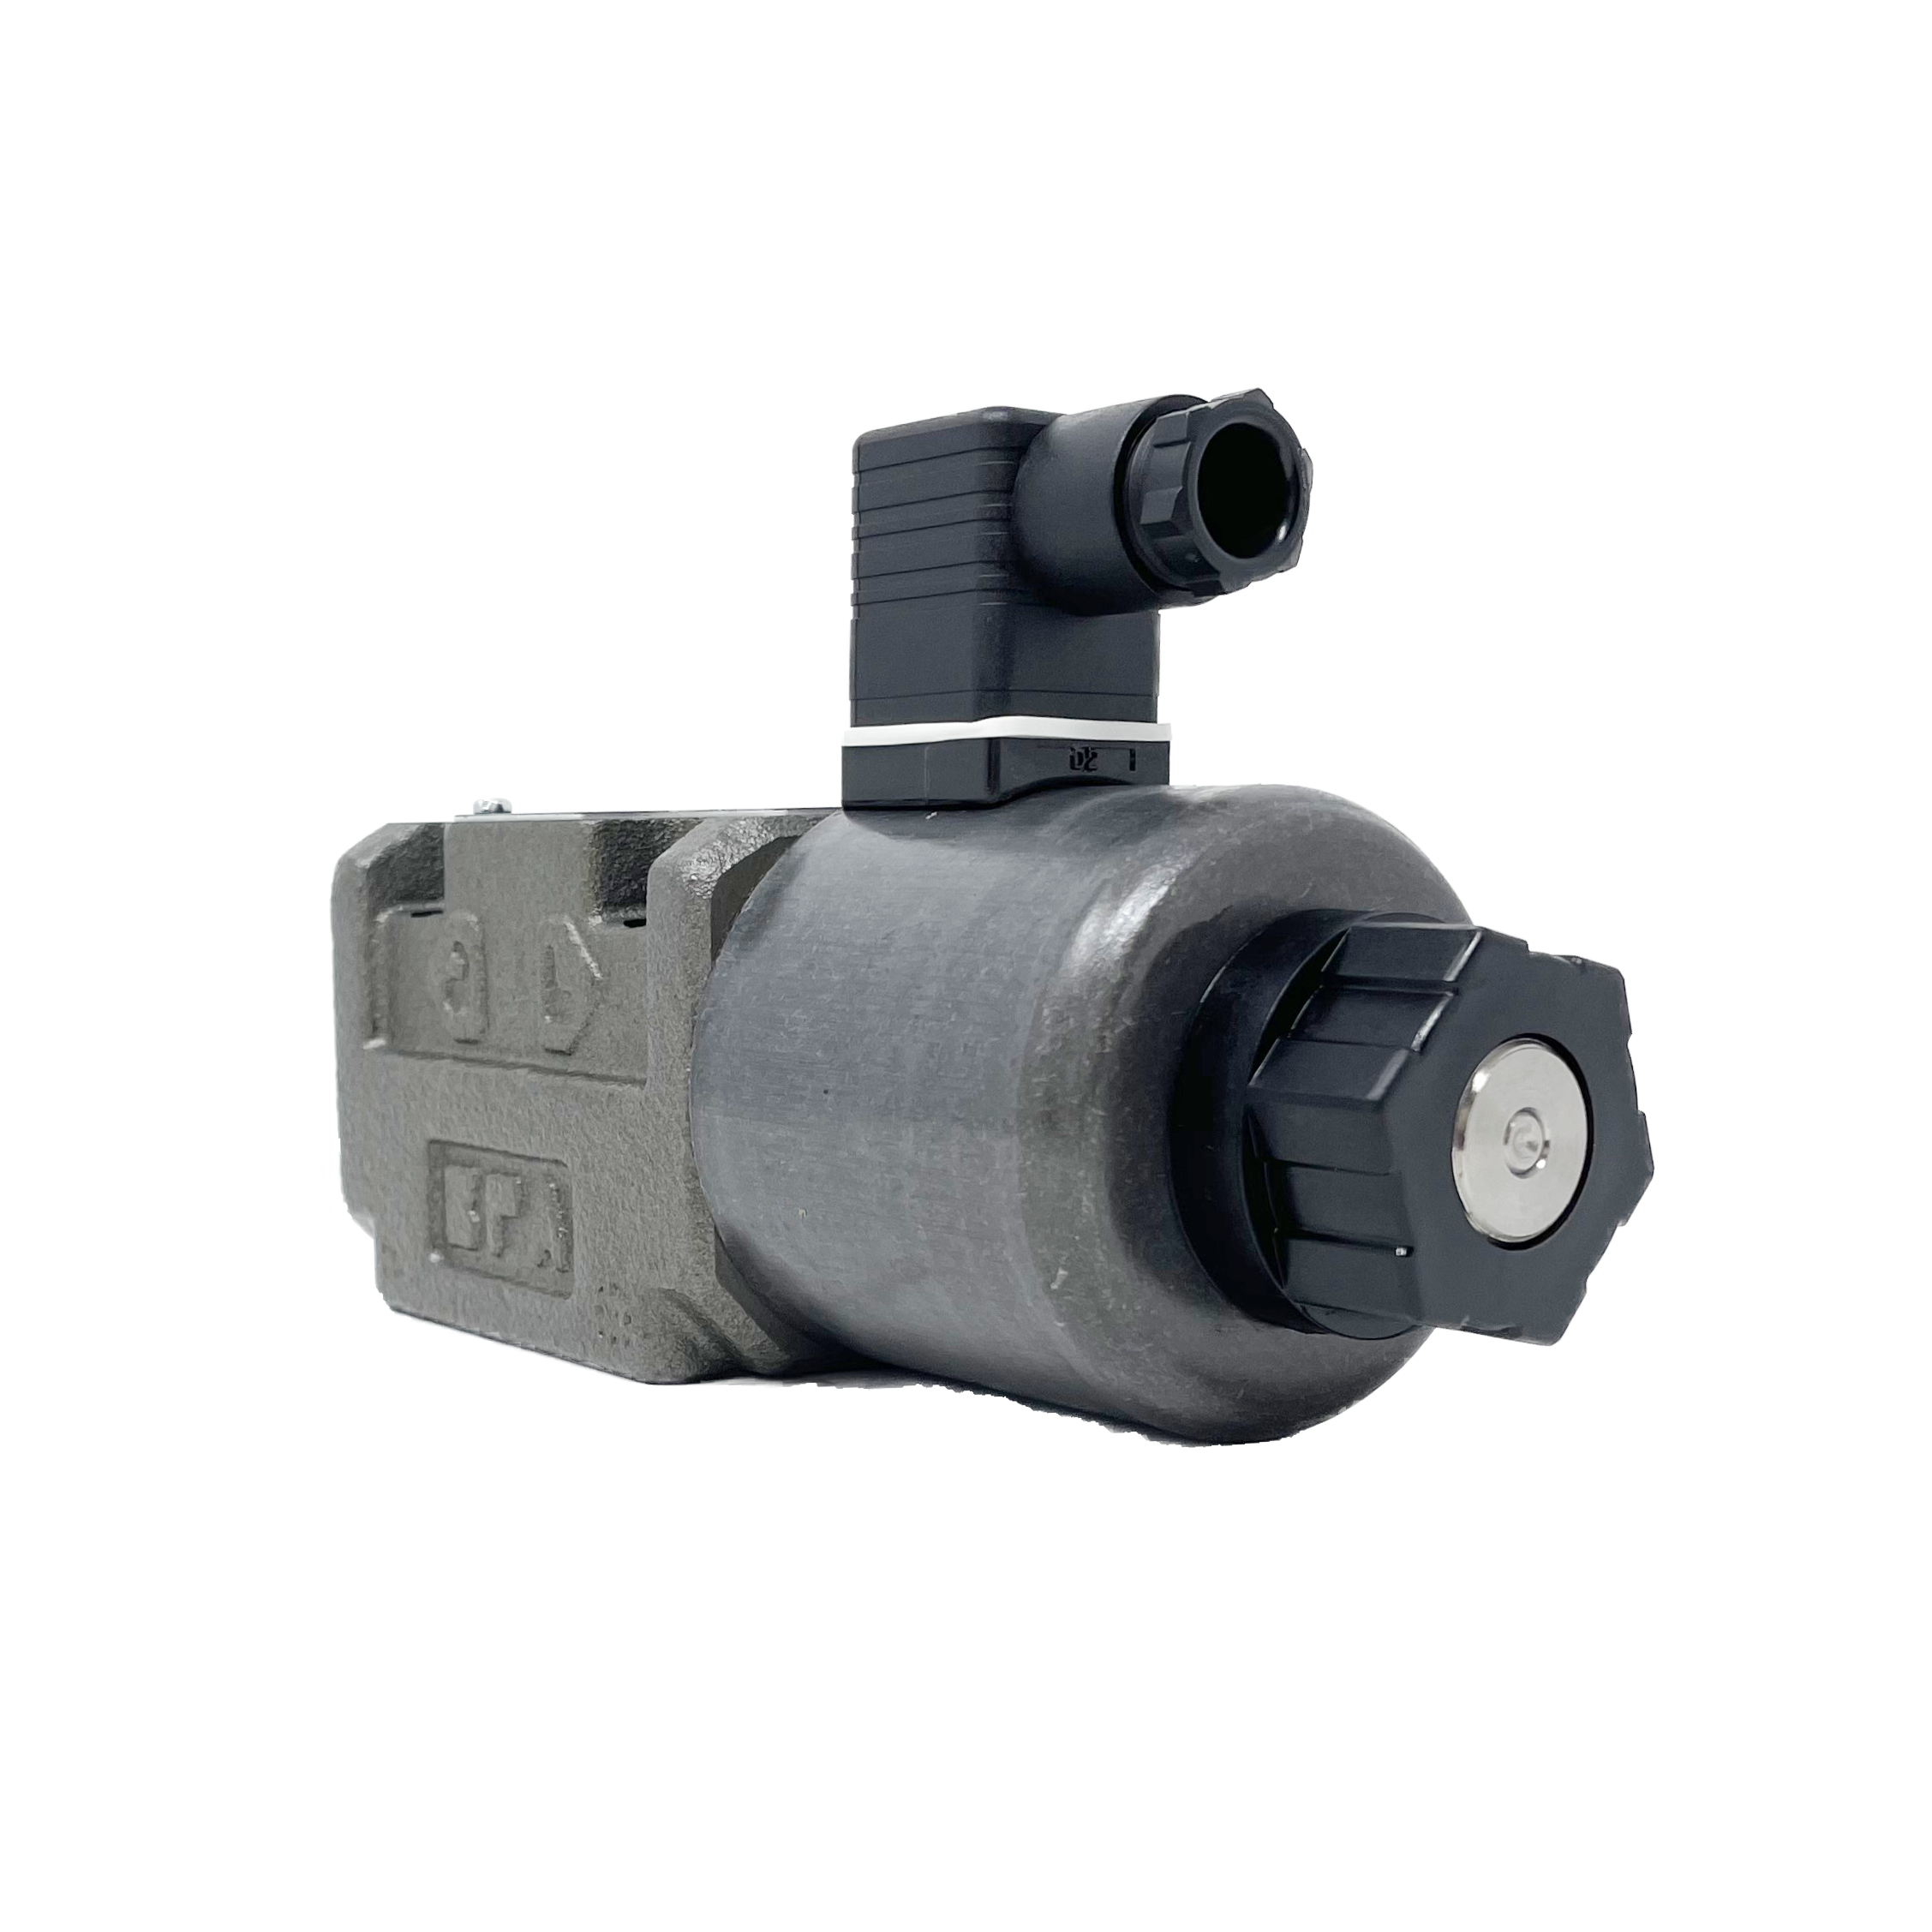 SA-G03-A4-C115-E21 : Nachi Solenoid Valve, 3P4W, D05 (NG10), 34.3GPM, 5075psi, All Ports Open Neutral, 110 VAC, DIN